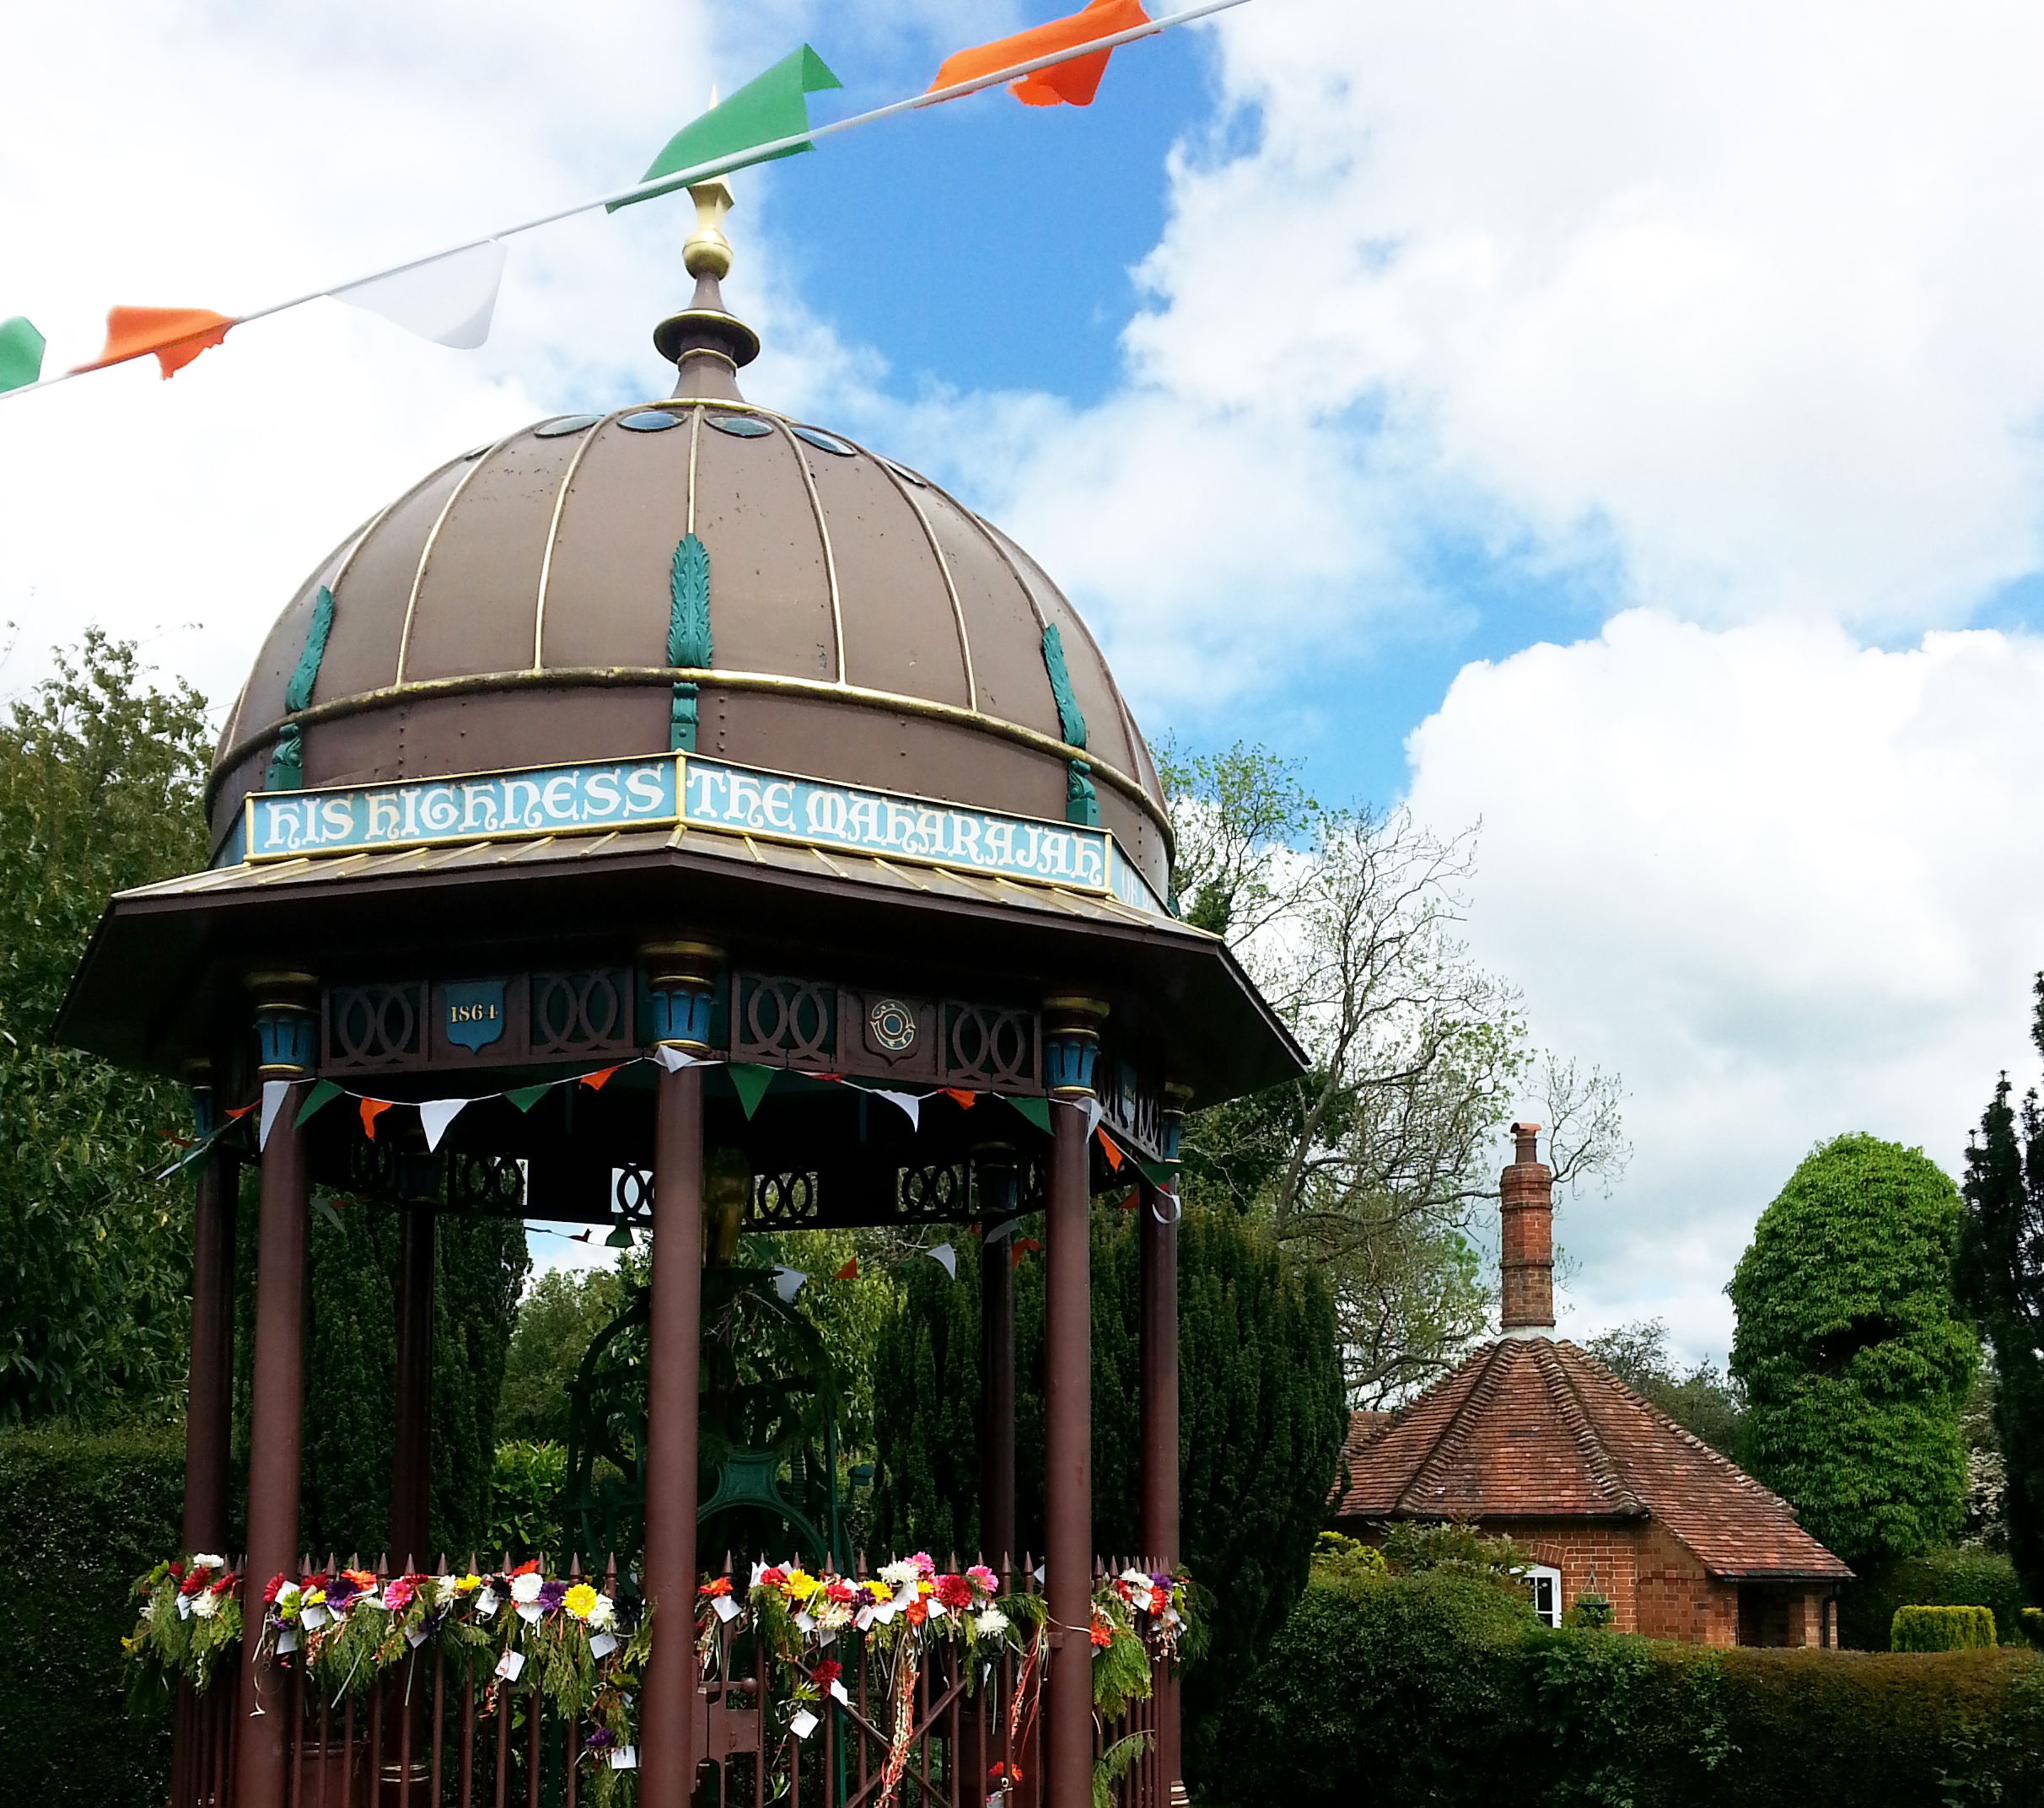 Letter from England - The Maharajah’s Well, Oxfordshire